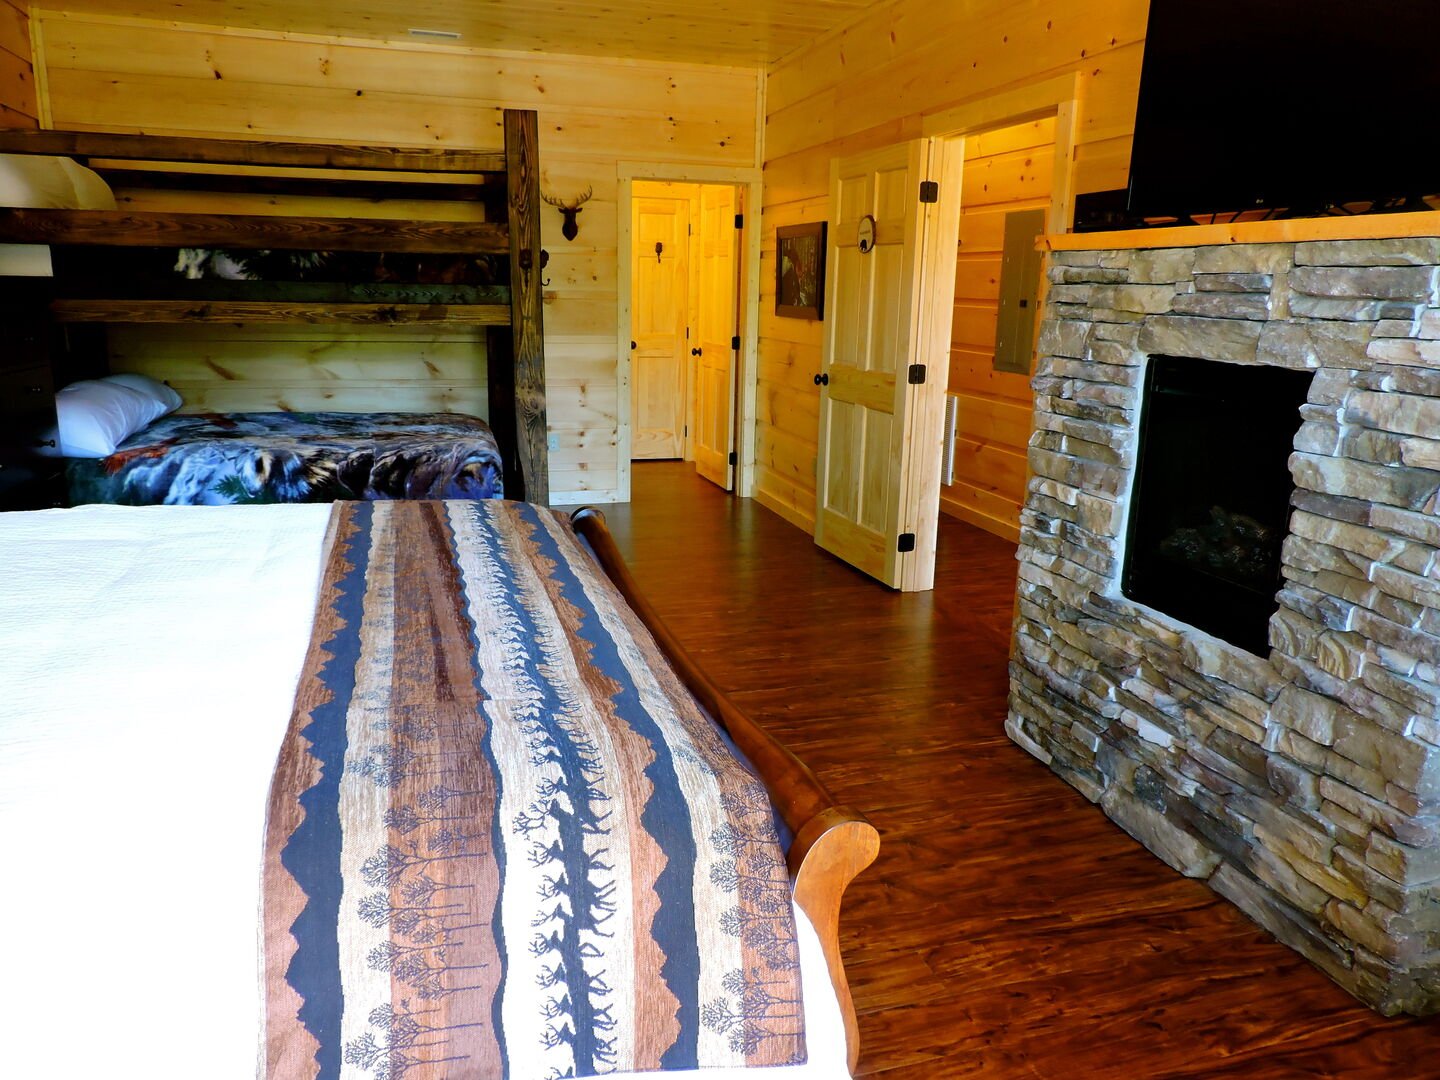 Fireplace, Large Bed, and Bunk Bed.